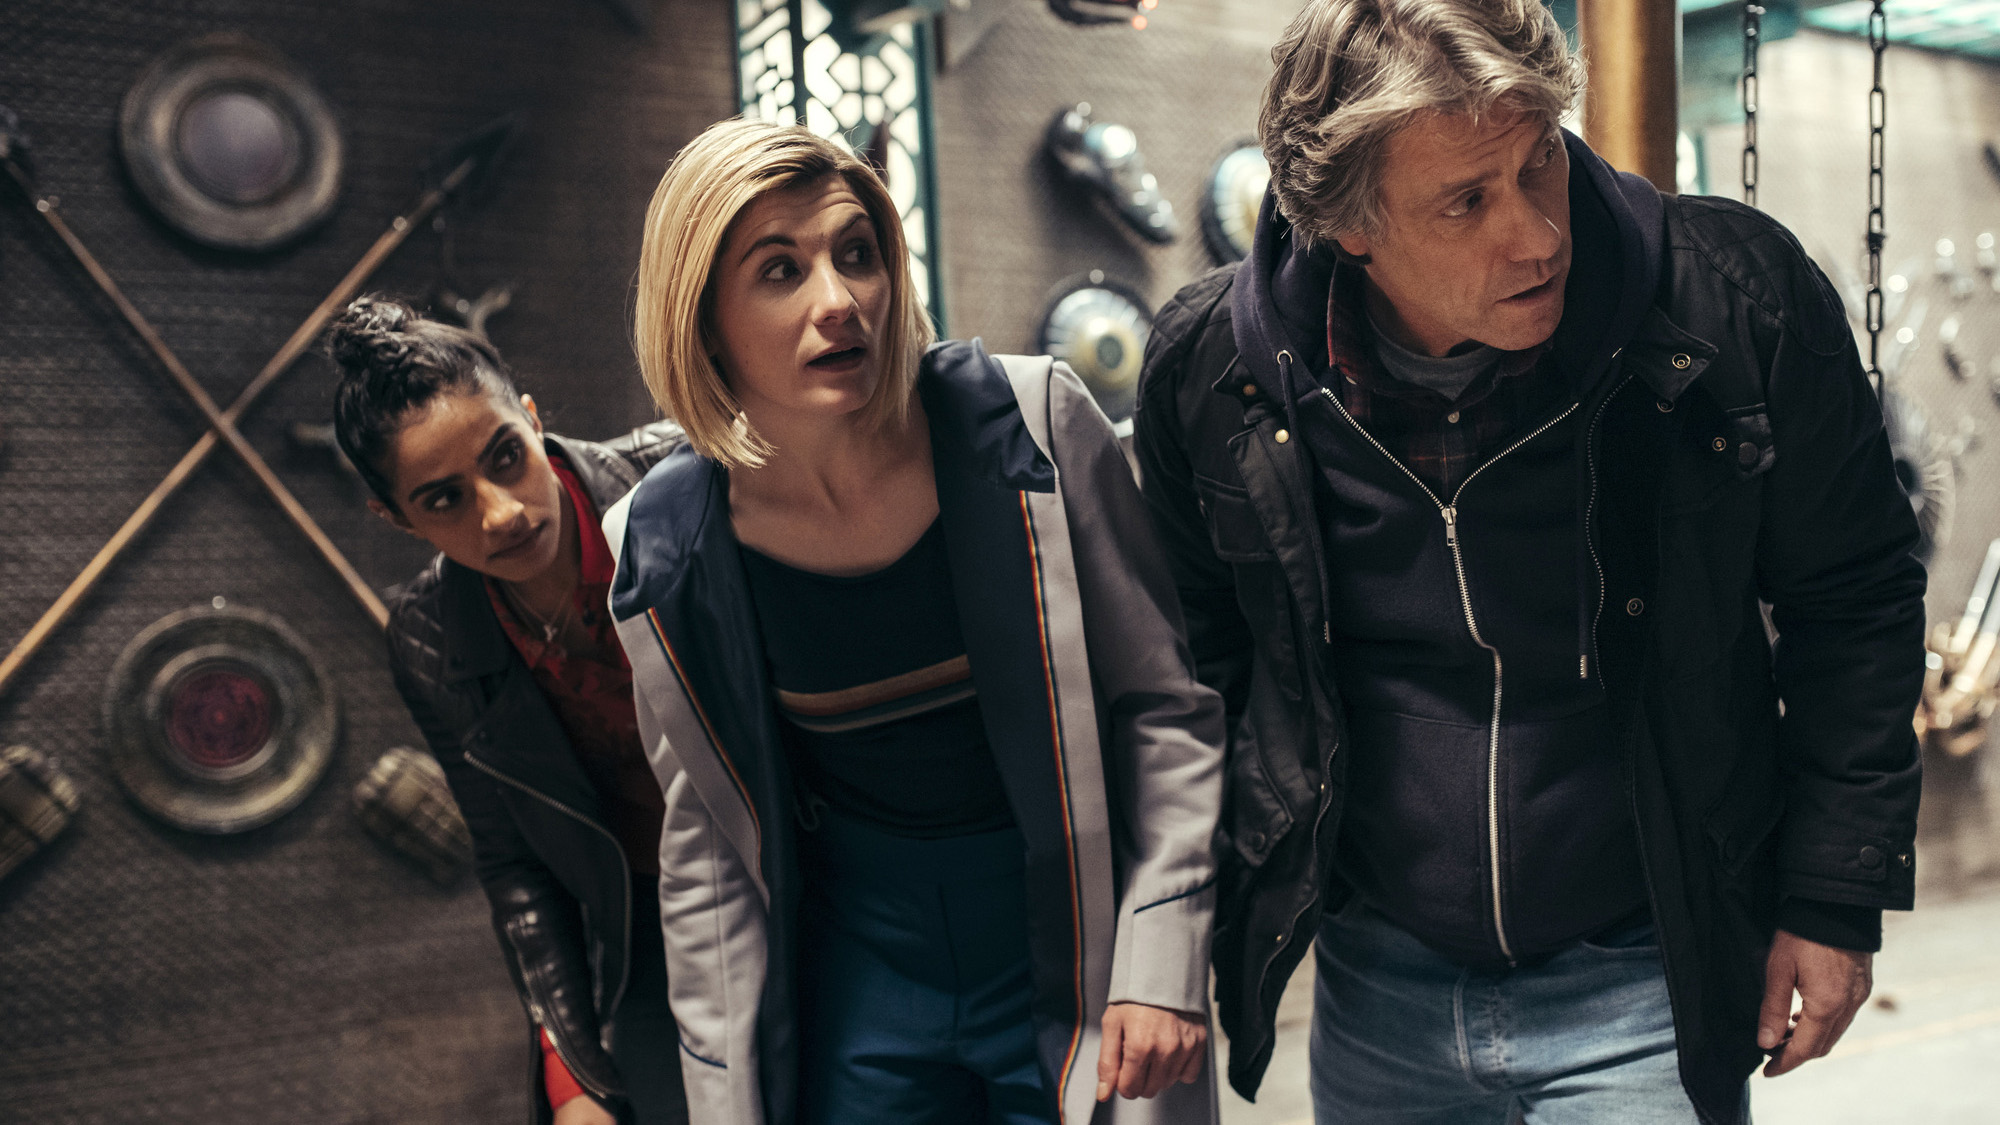 doctor who specials watch online free